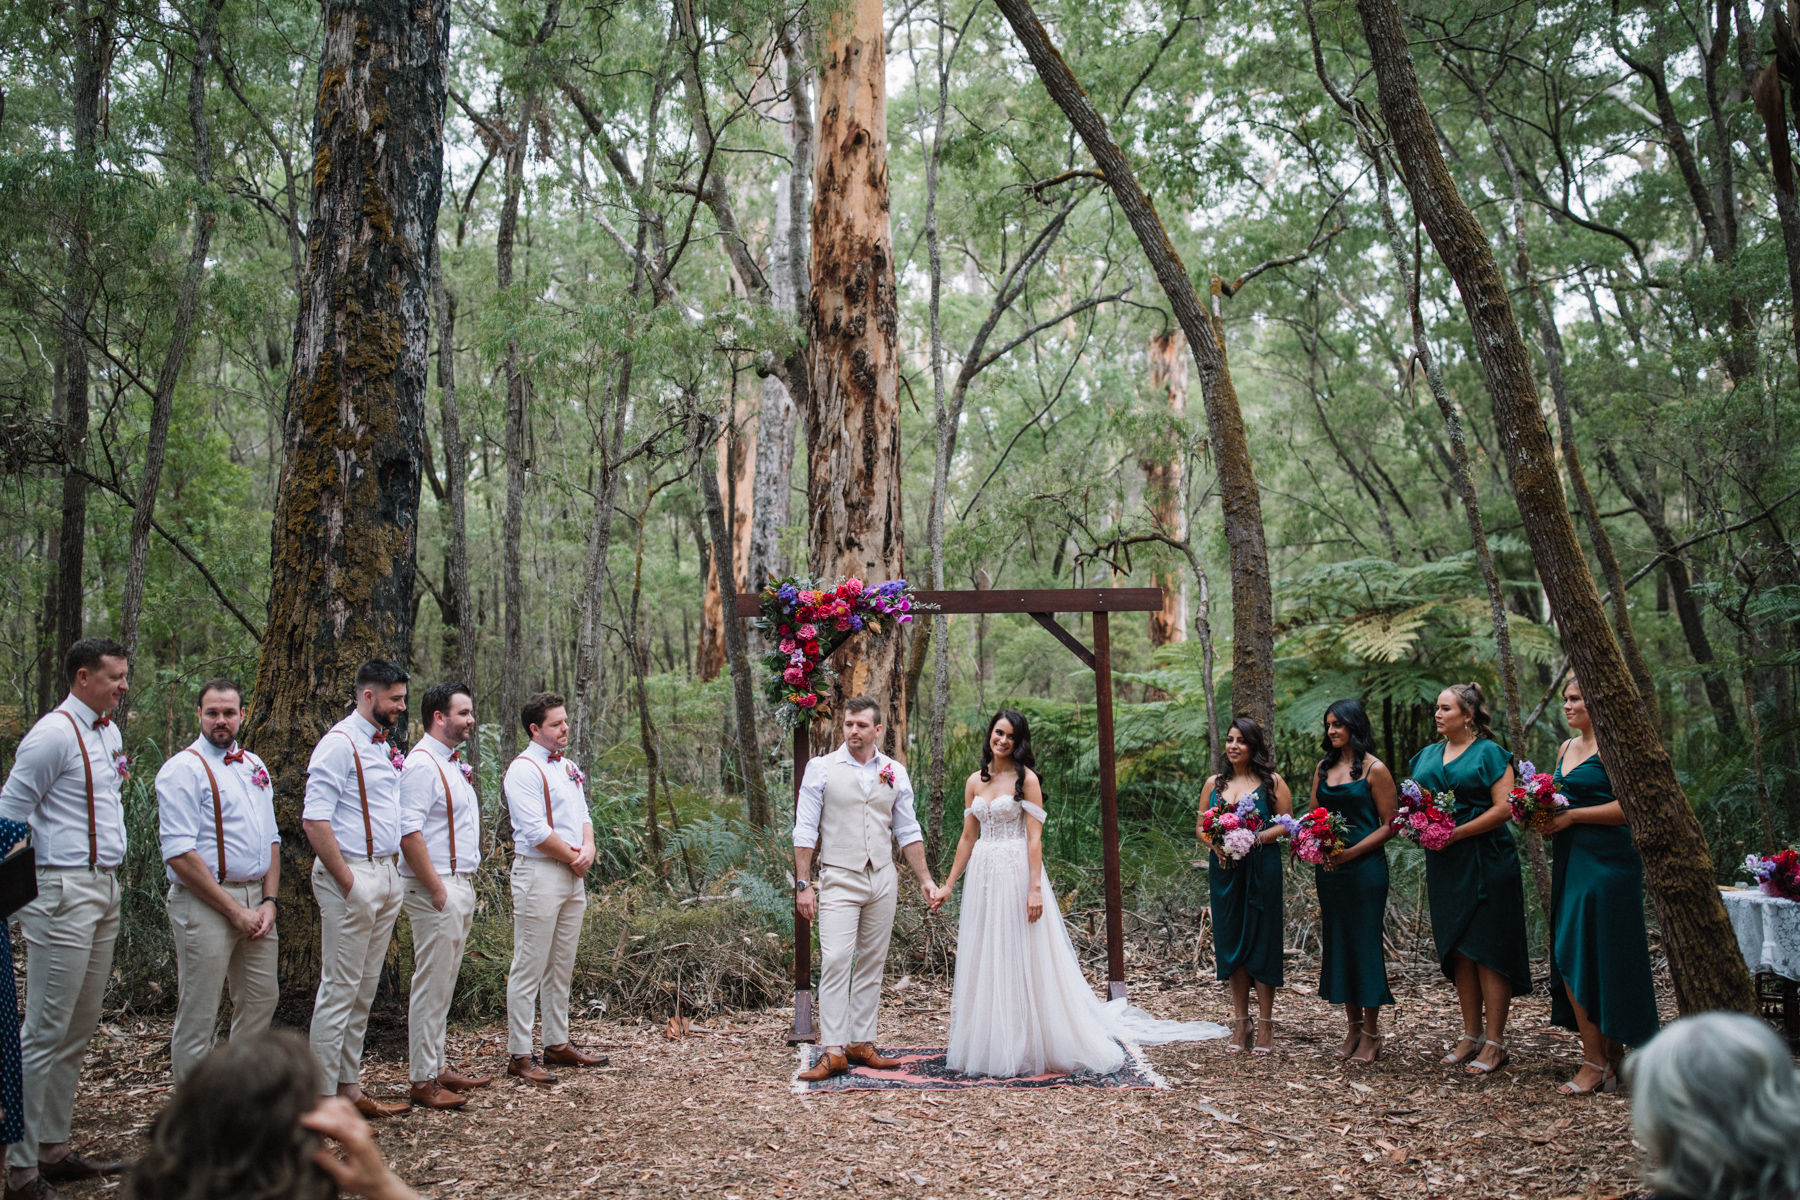 A wedding ceremony featuring bride and groom with 5 groomsmen in white shirts and grey pants and four bridesmaids in green dresses surrounded by tall trees in the forest